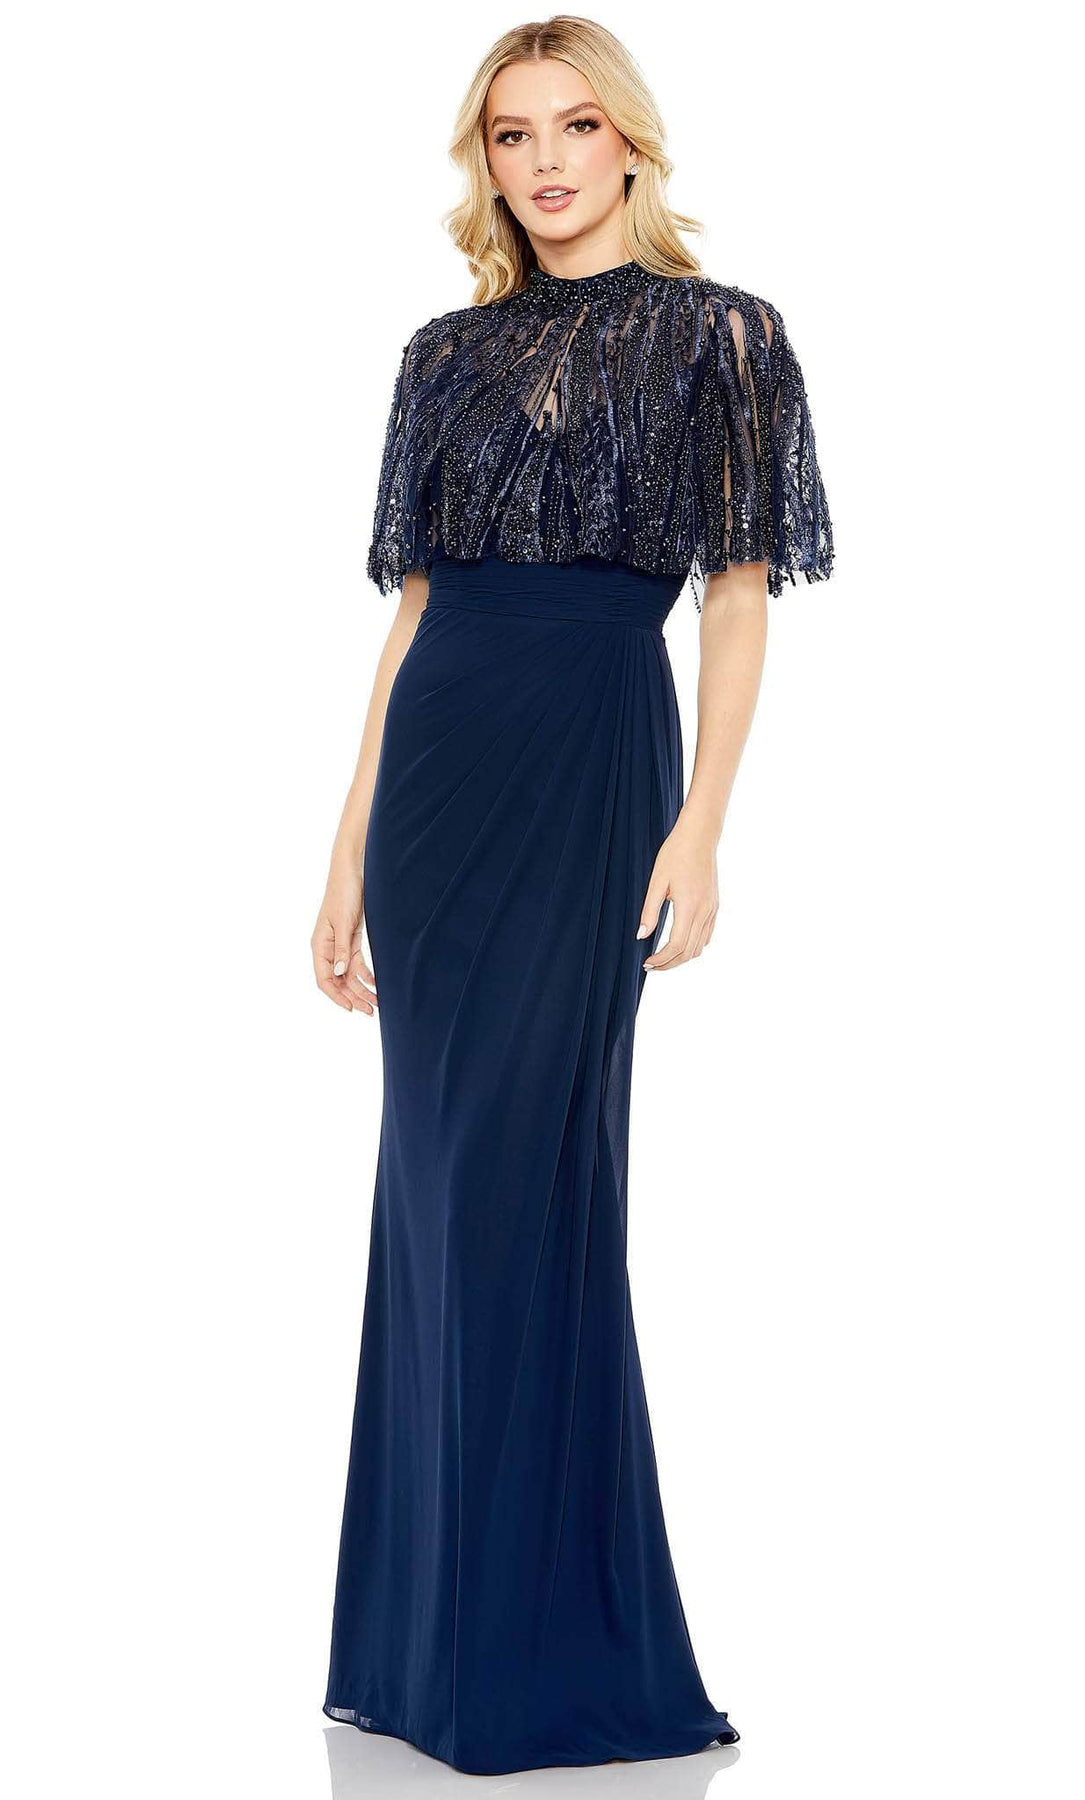 Mac Duggal 20467 - Embellished Cape Sleeveless Evening Dress Special Occasion Dress 2 / Navy